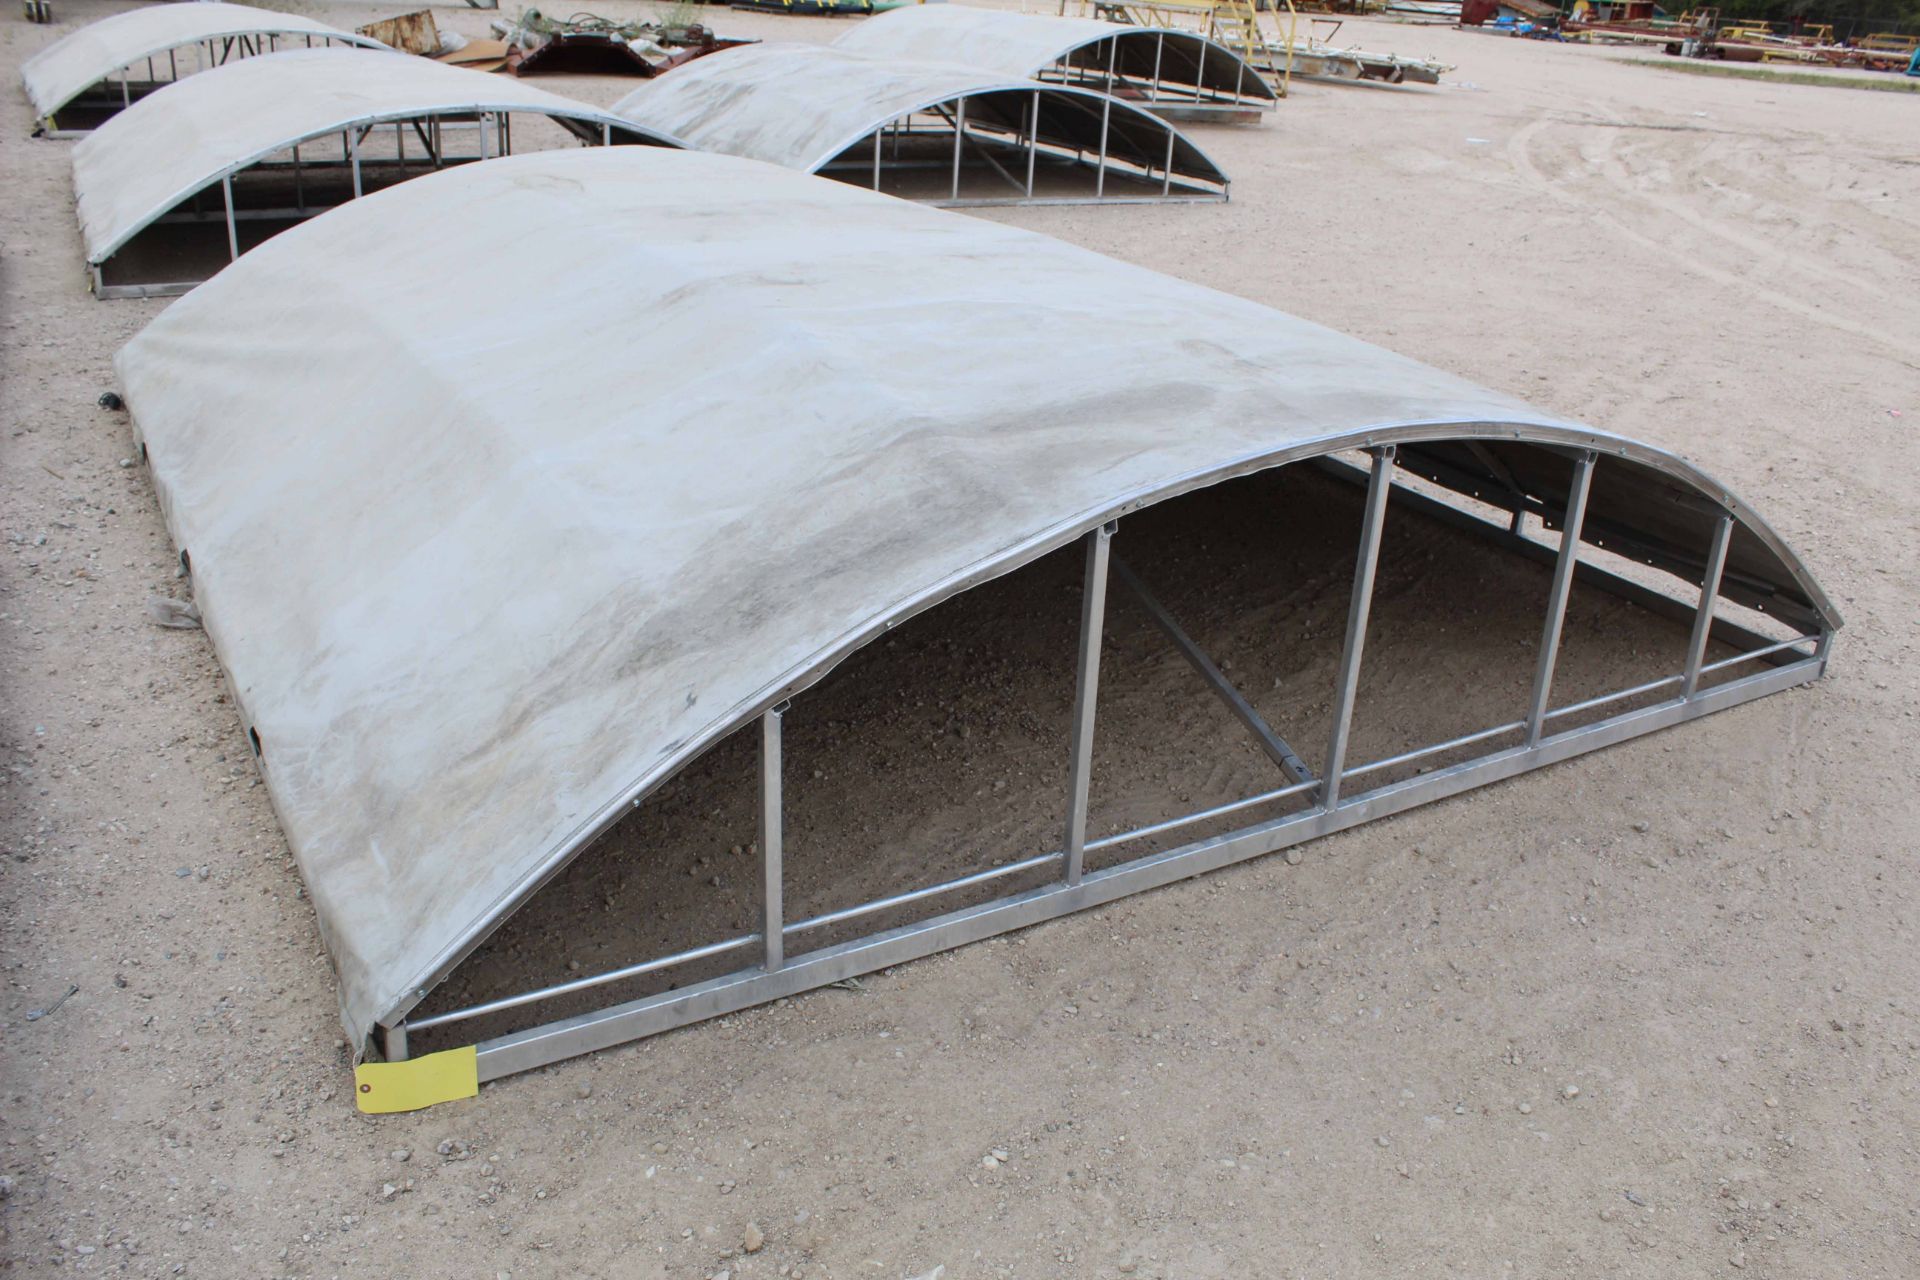 MUD TANK CANOPY, aluminum framed, w/canvas cover, approx dia. 10' x 13'